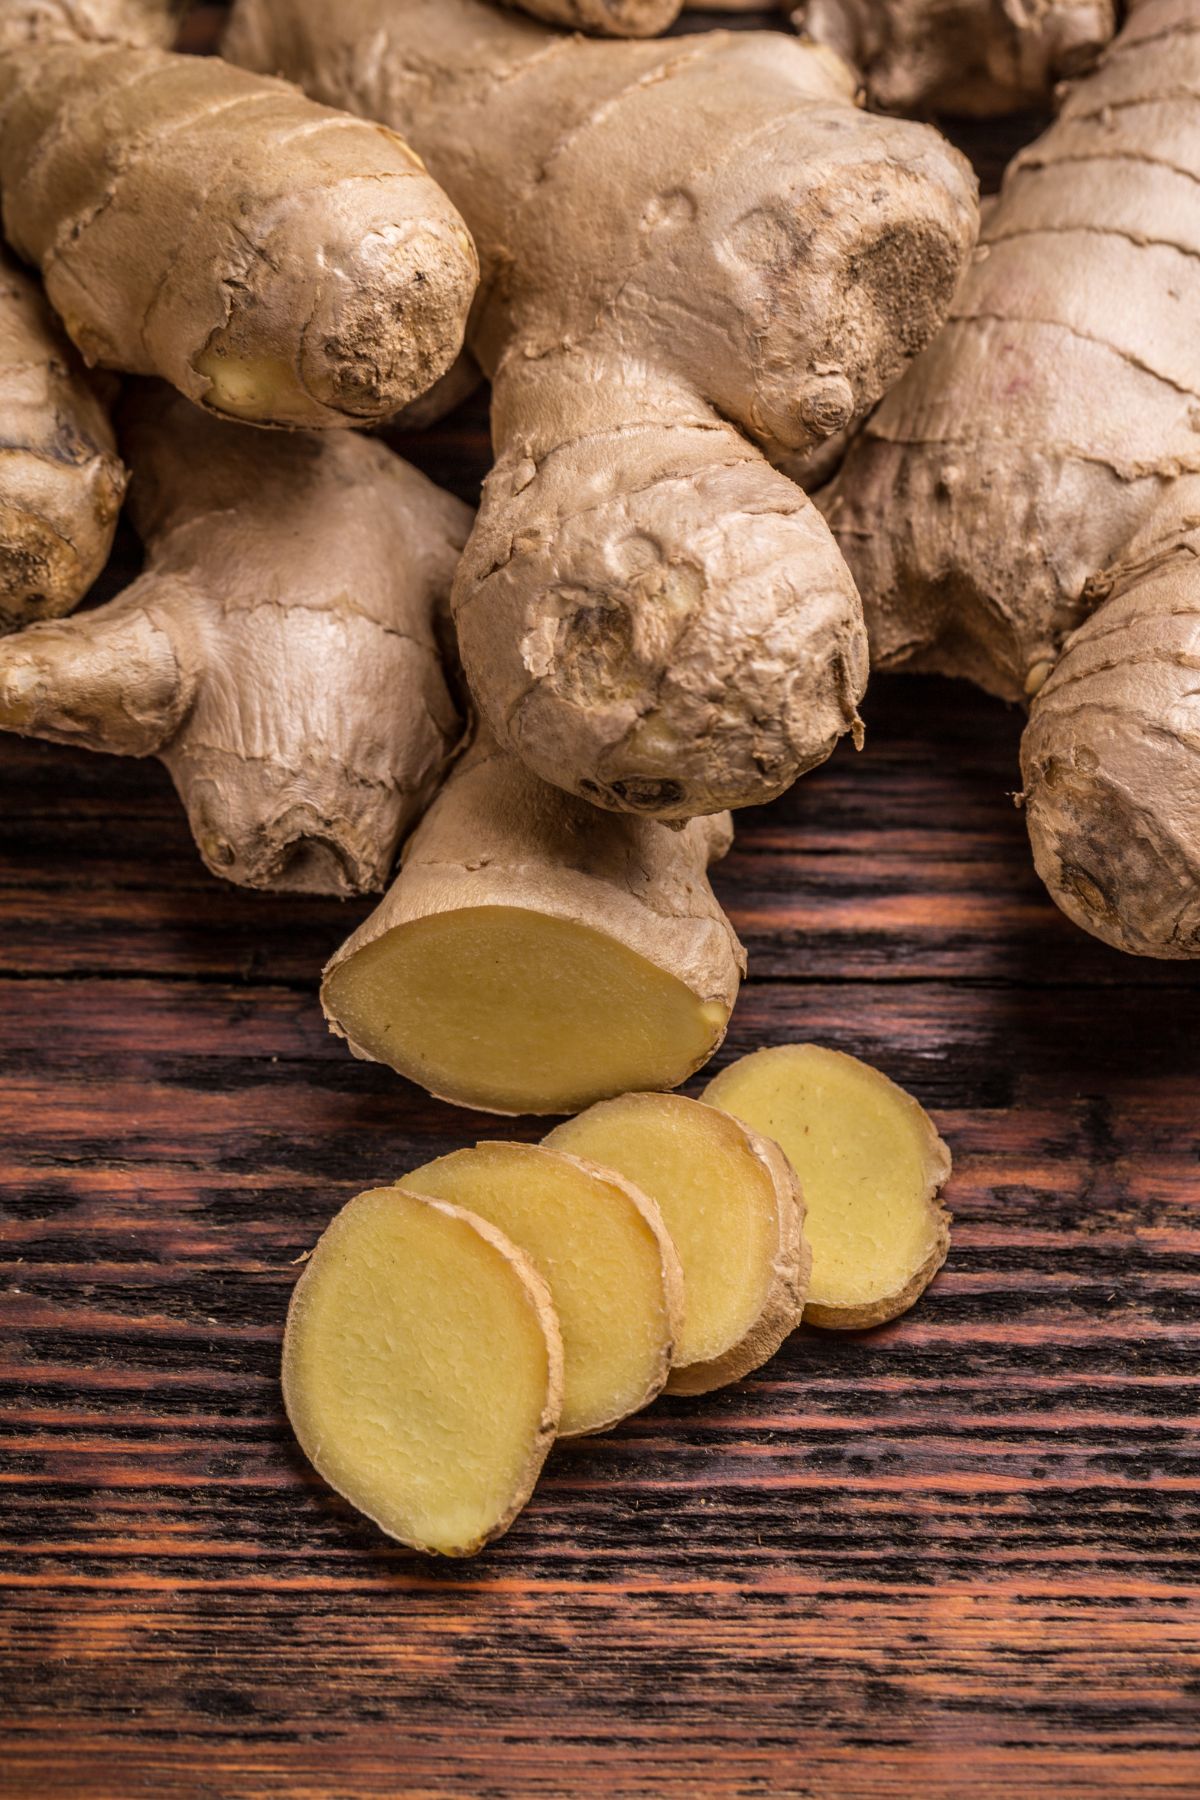 Fingers and slices of ginger root on a wooden surface.